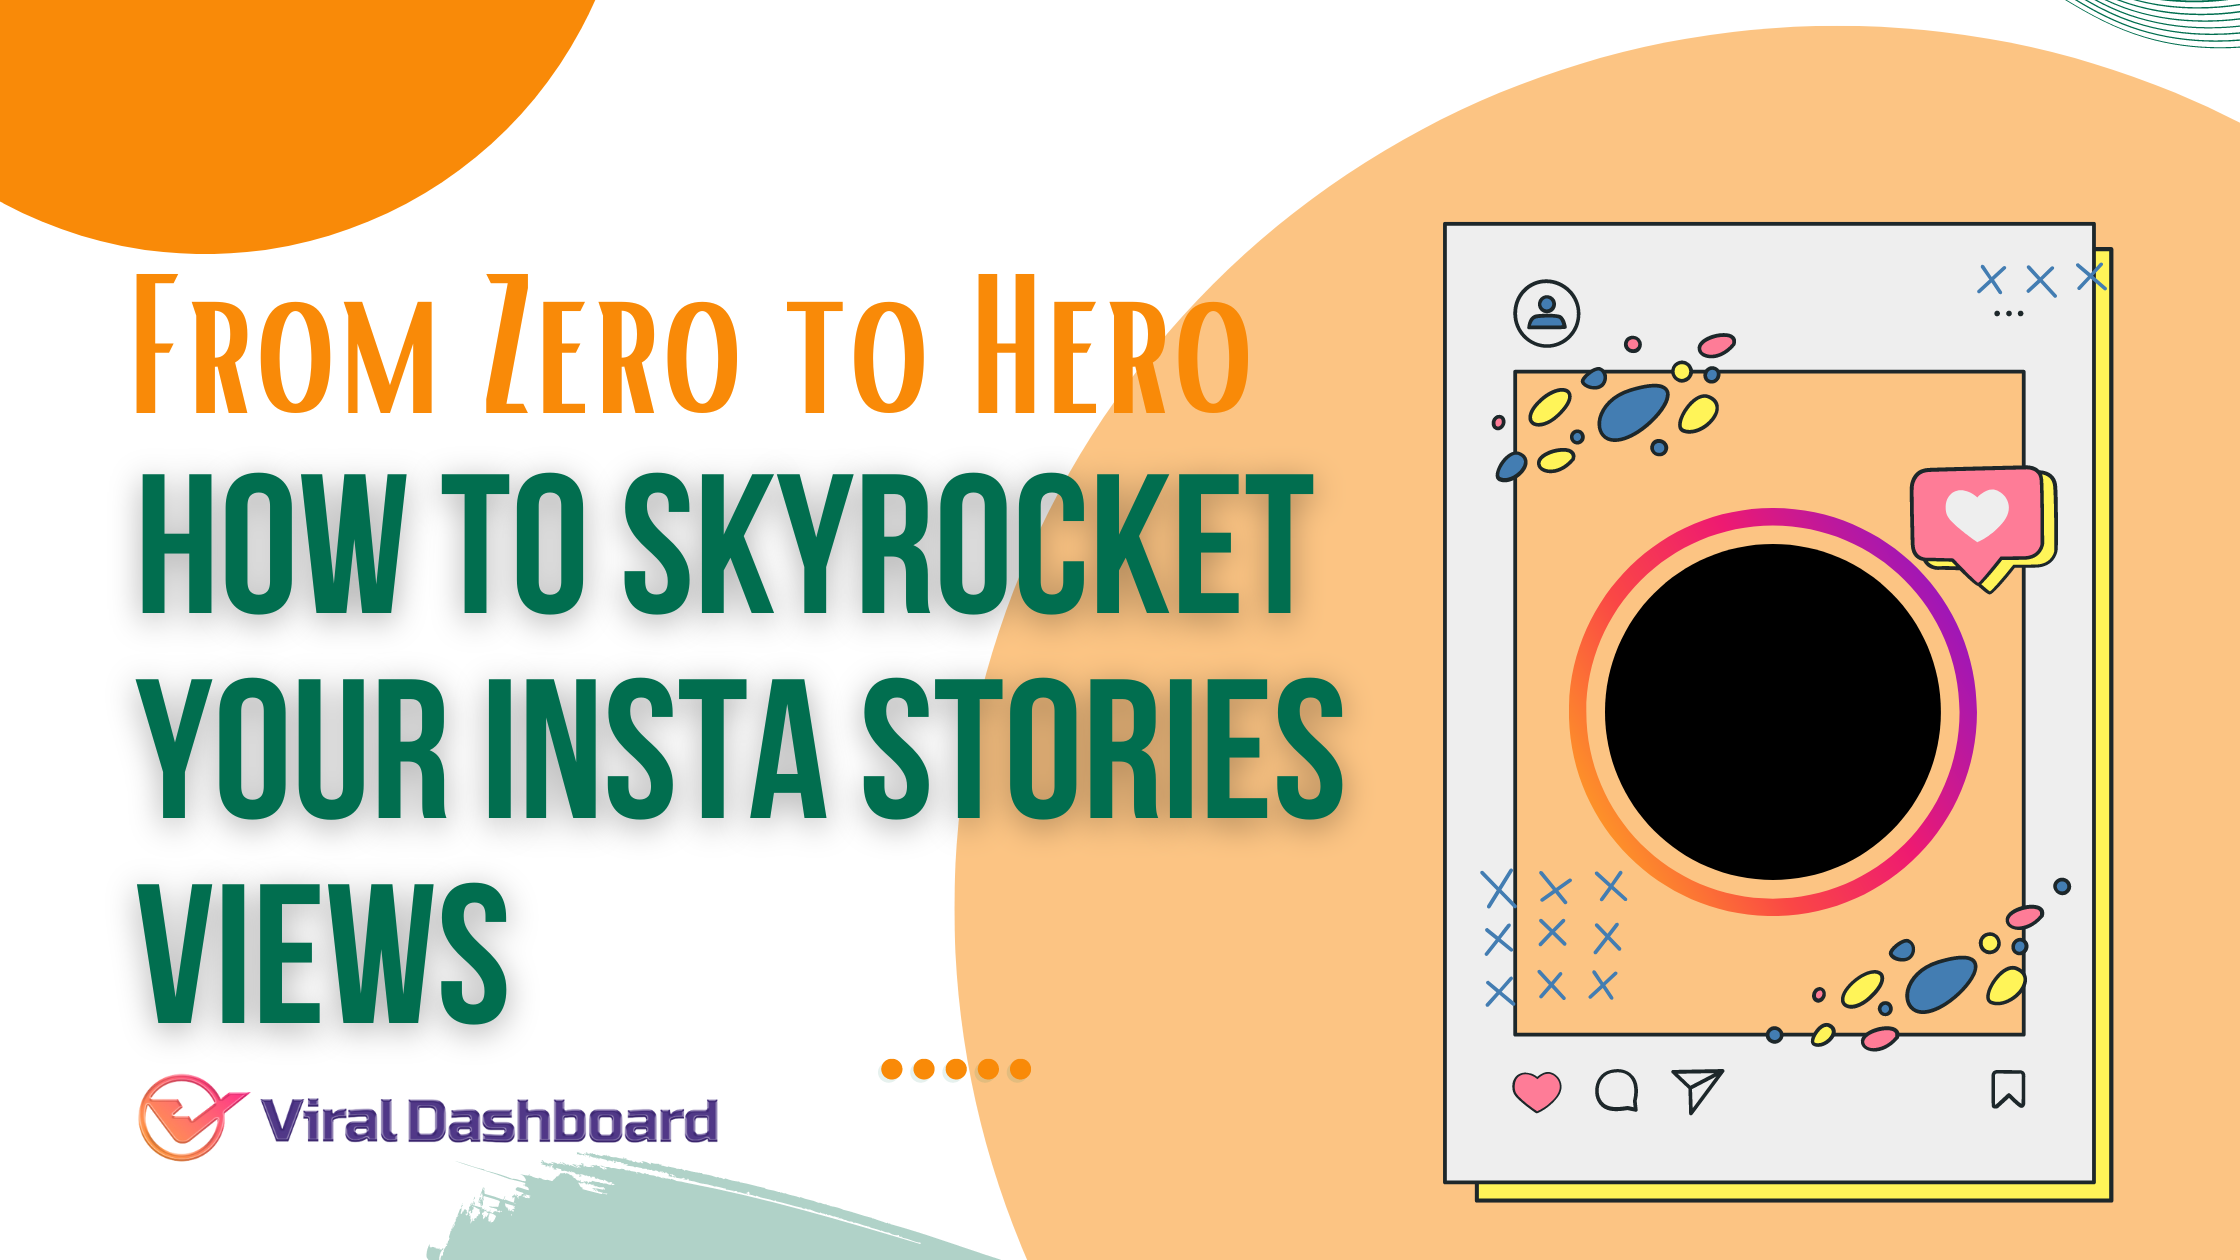 From Zero to Hero: How to Skyrocket Your Insta Stories Views